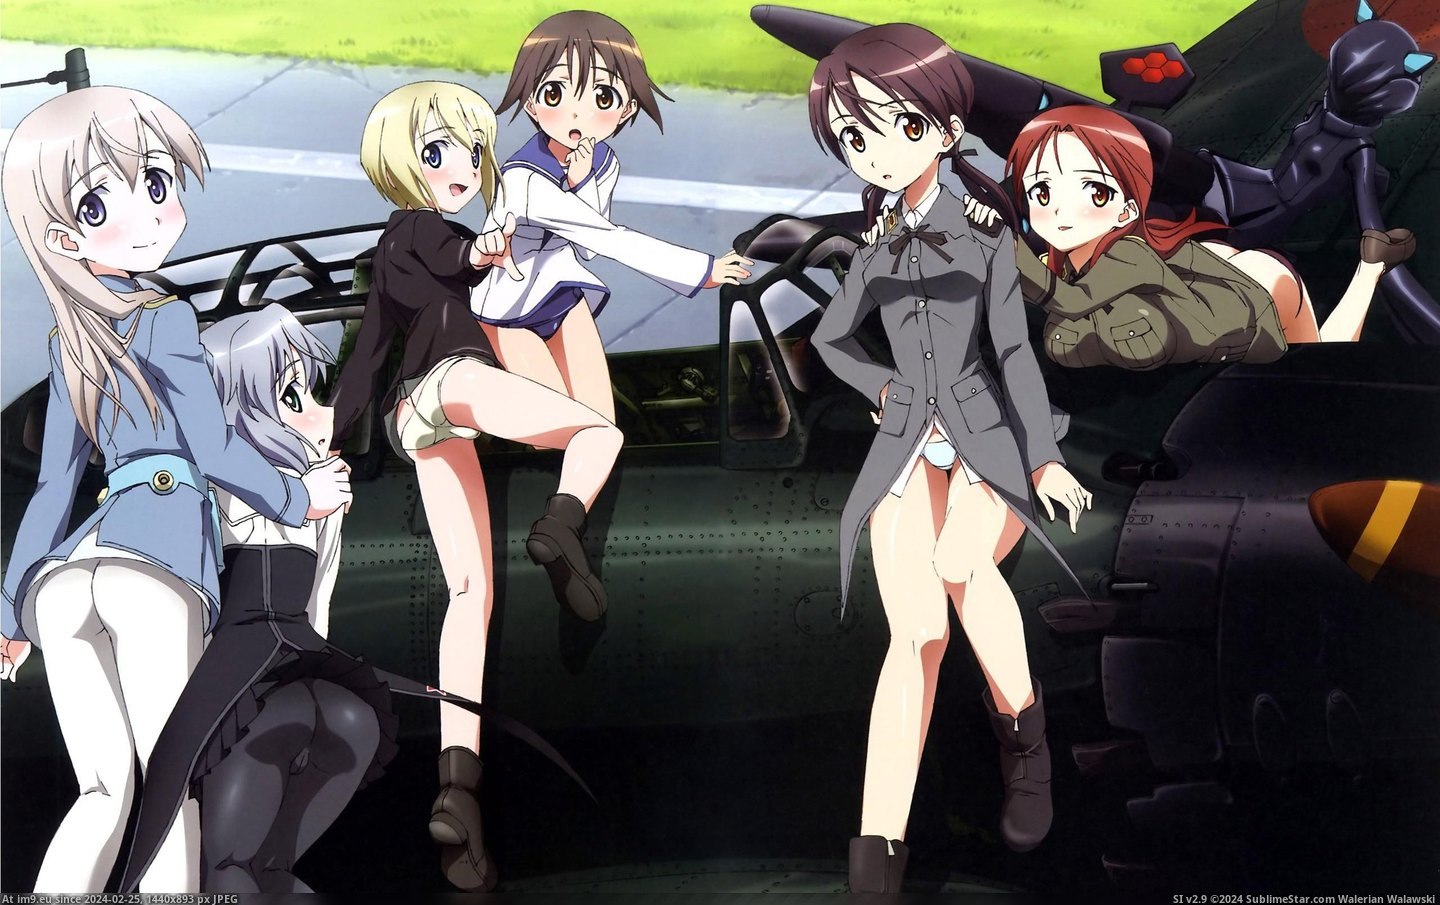 #Girls #Wallpaper #Witches #Anime #Strike Strike Witches Hd Anime Girls Wallpaper 61(1) (HD) Pic. (Image of album HD Wallpapers - anime, games and abstract art/3D backgrounds))